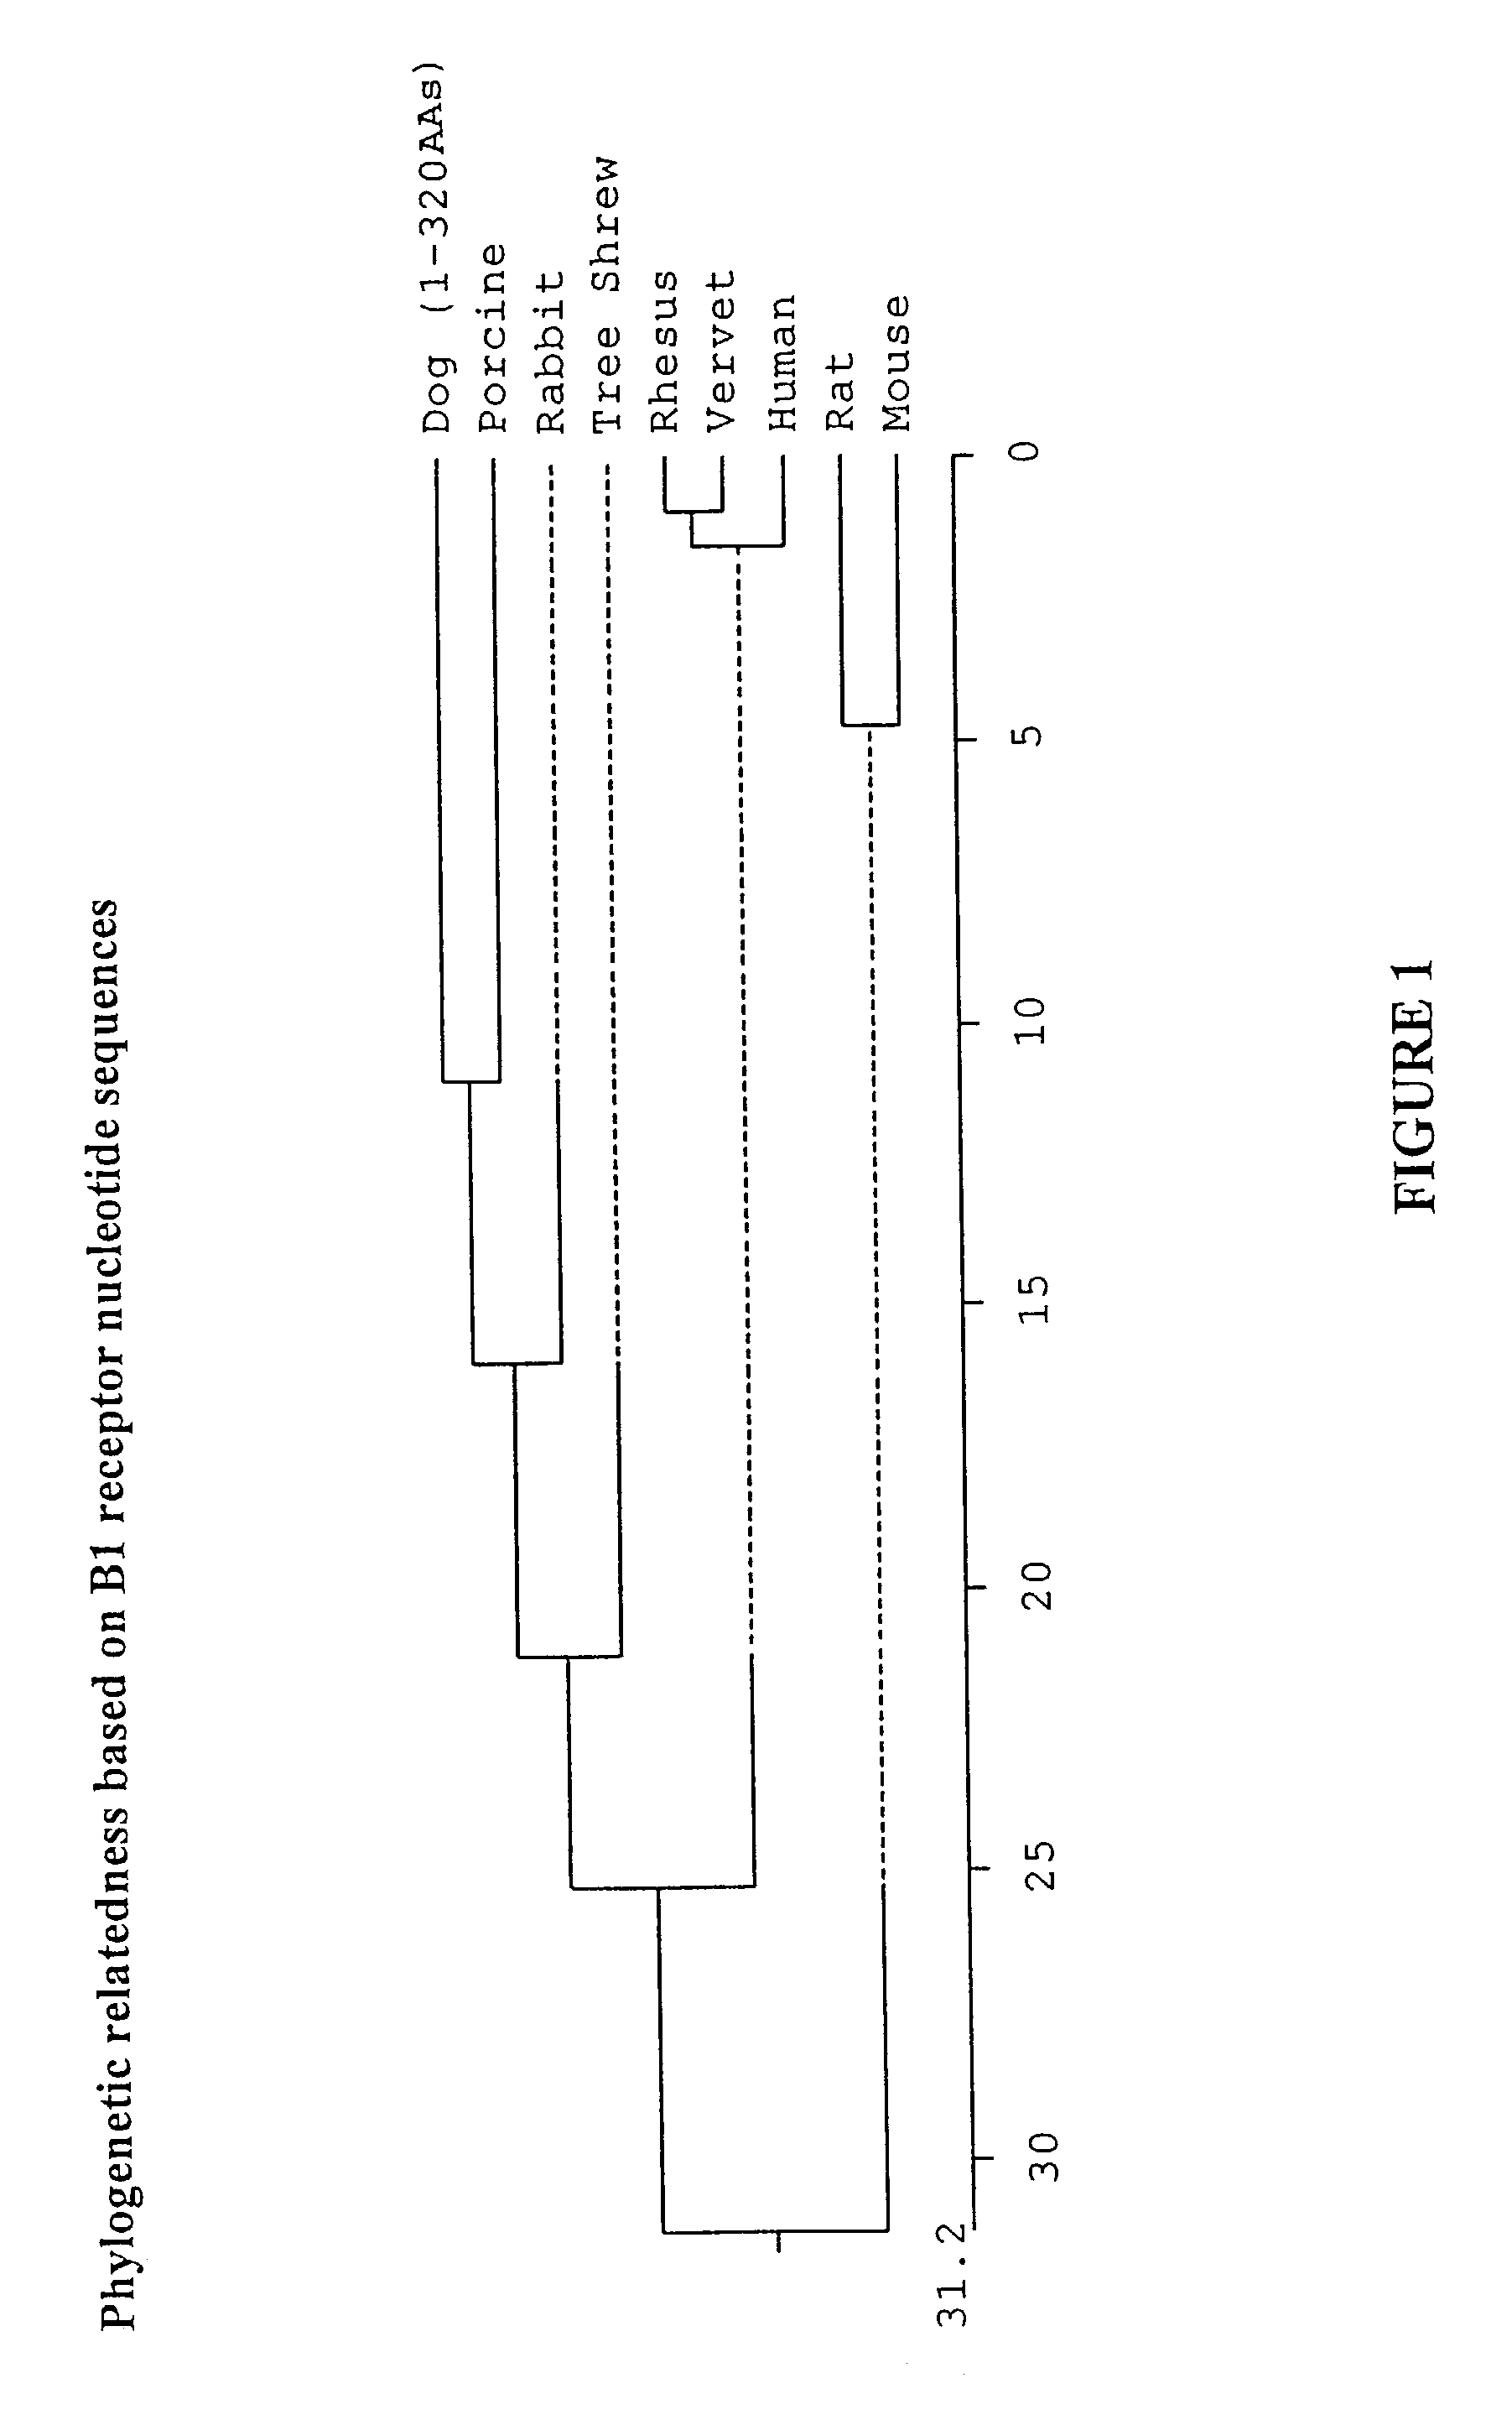 Orthologues of human receptors and methods of use